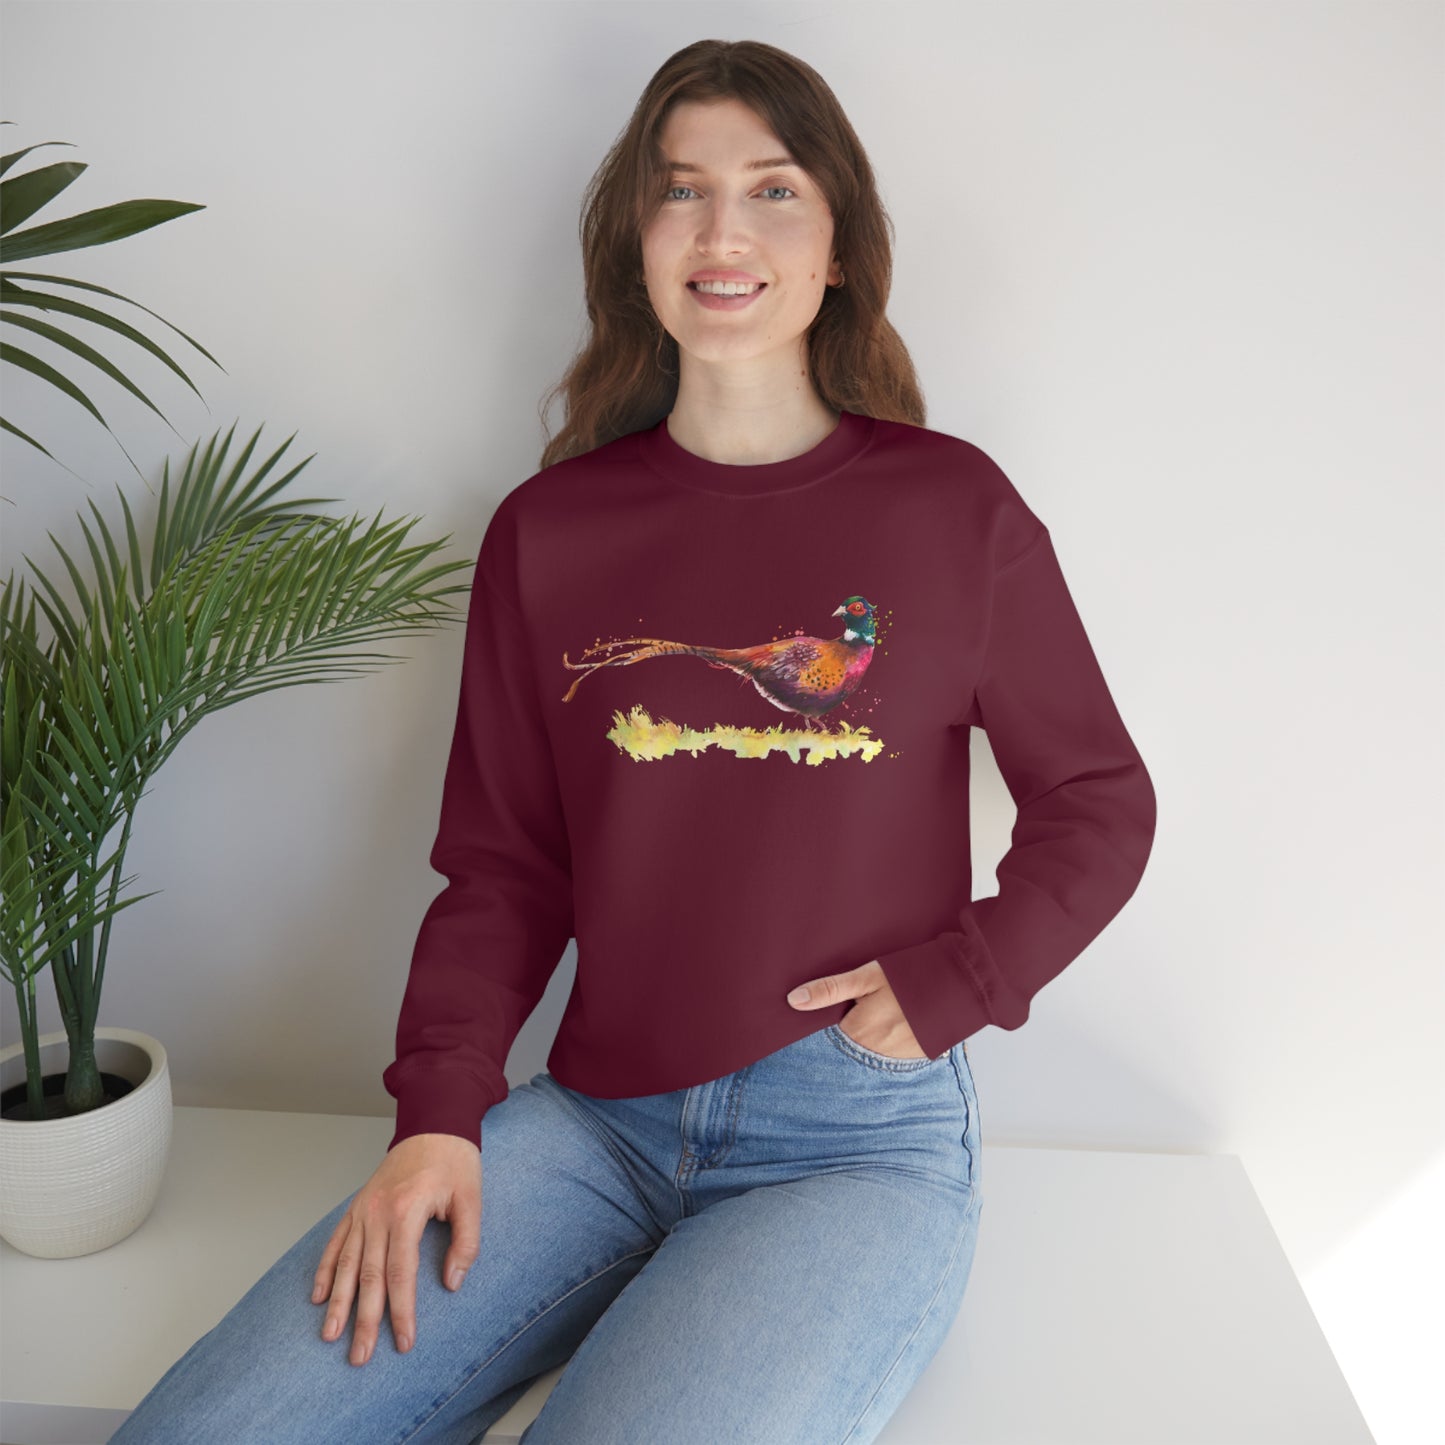 Mock up of a woman sitting on a surface while wearing the Maroon shirt